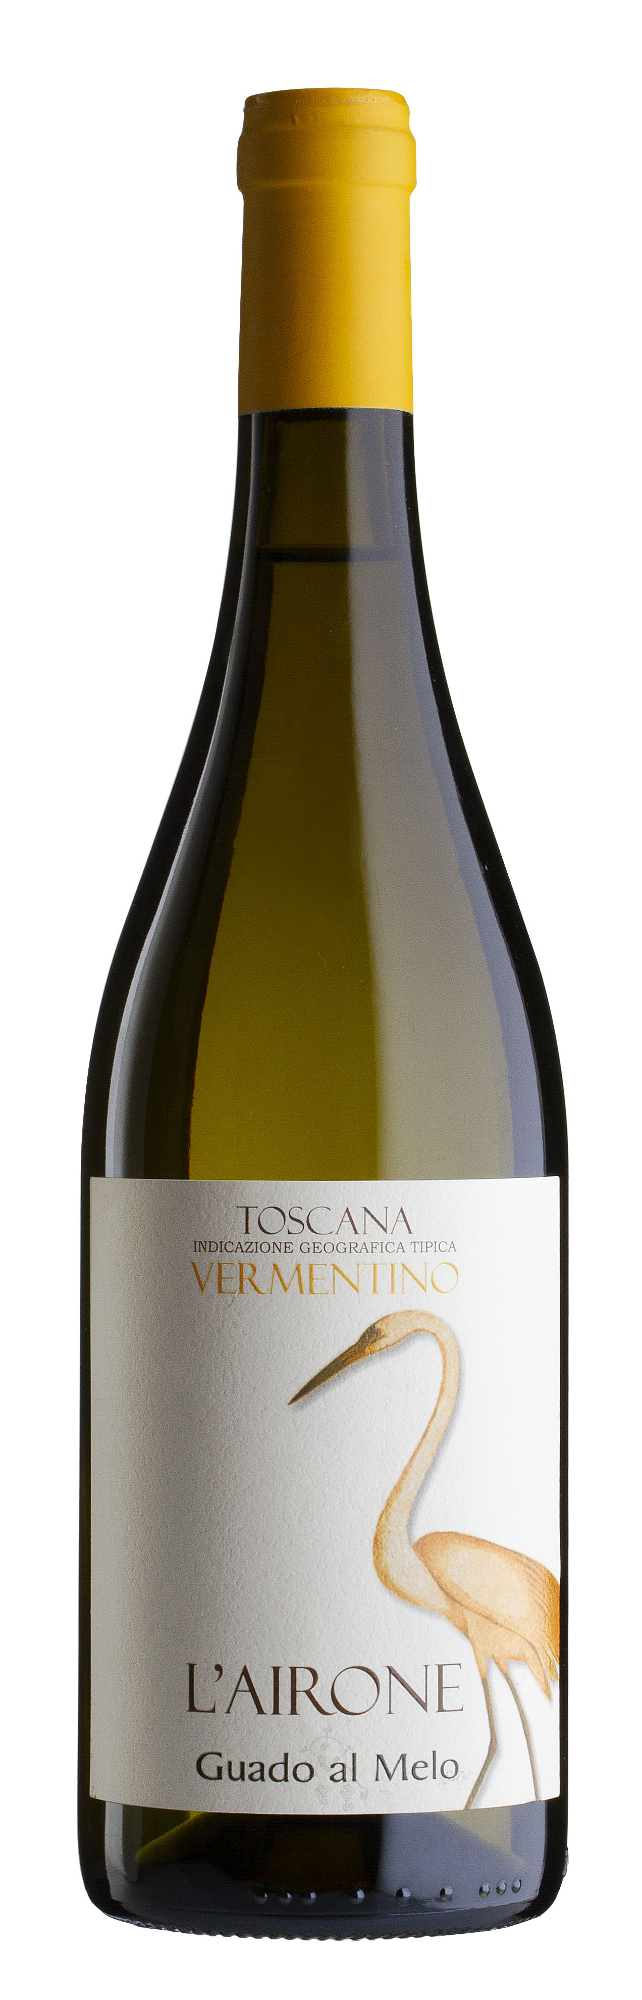 Vermentino Toscana IGT “L’AIRONE”